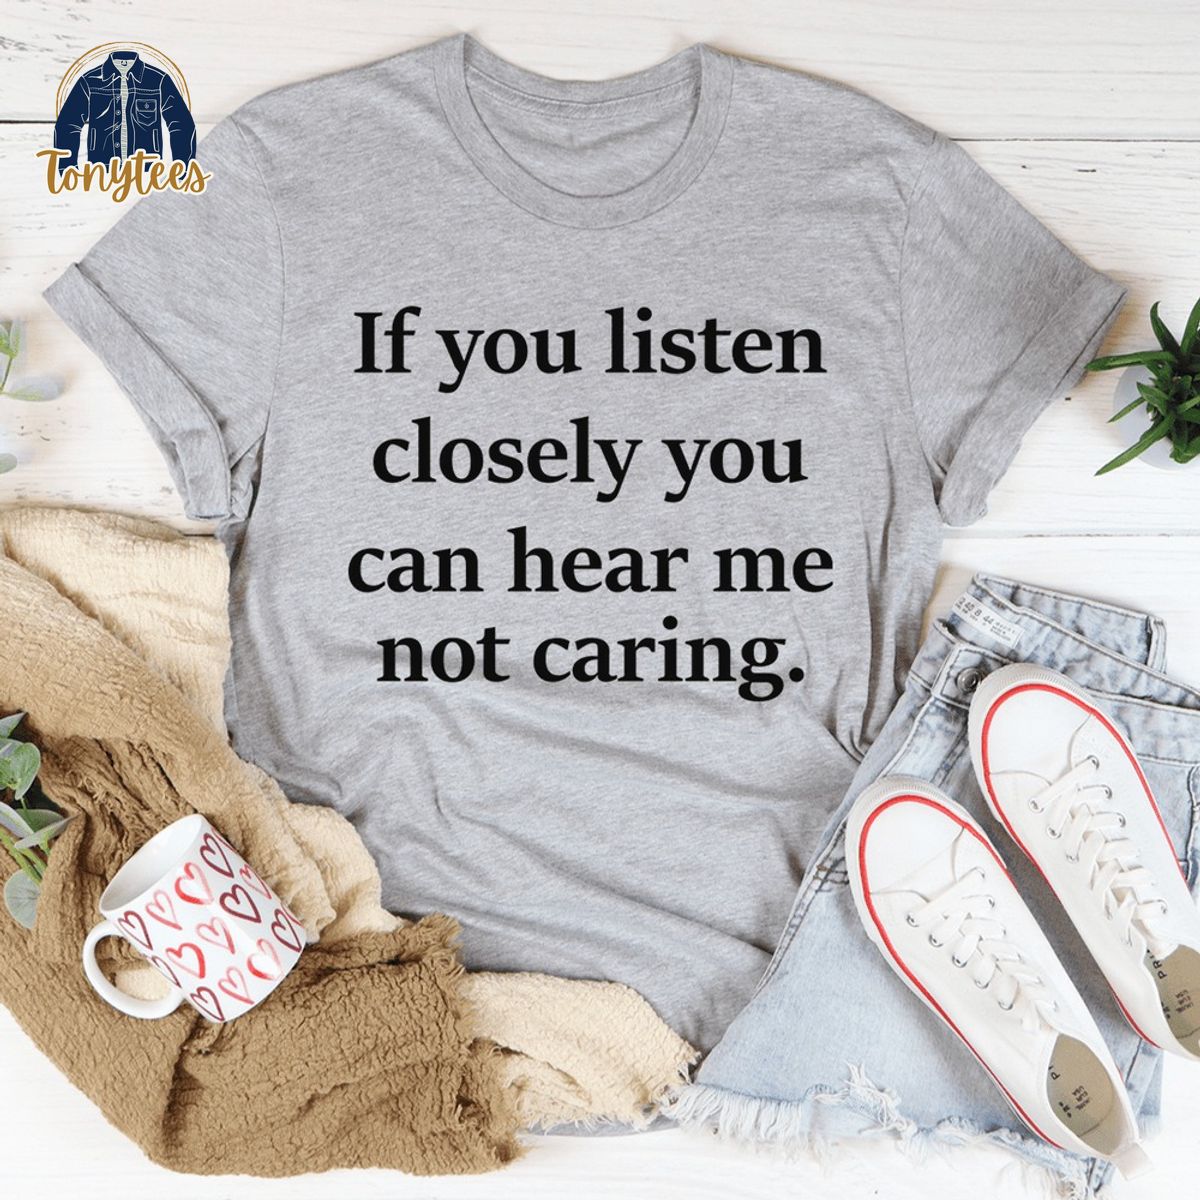 If you listen closely you can hear me not caring shirt